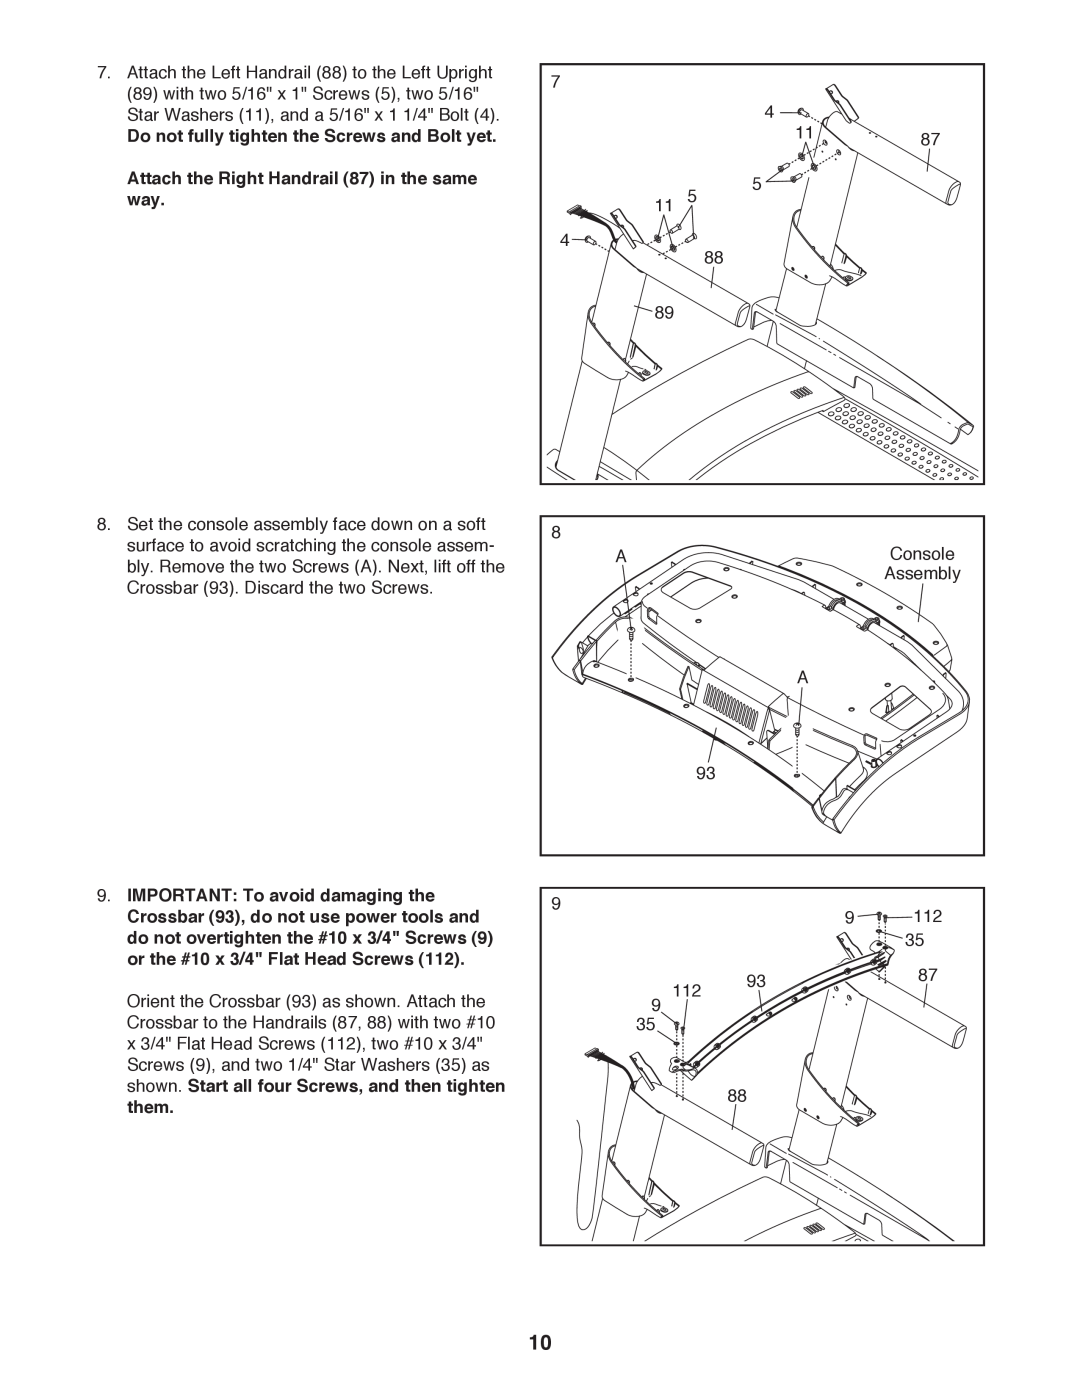 ProForm 795 user manual Do not fully tighten the Screws and Bolt yet, Attach the Right Handrail 87 in the same, them 